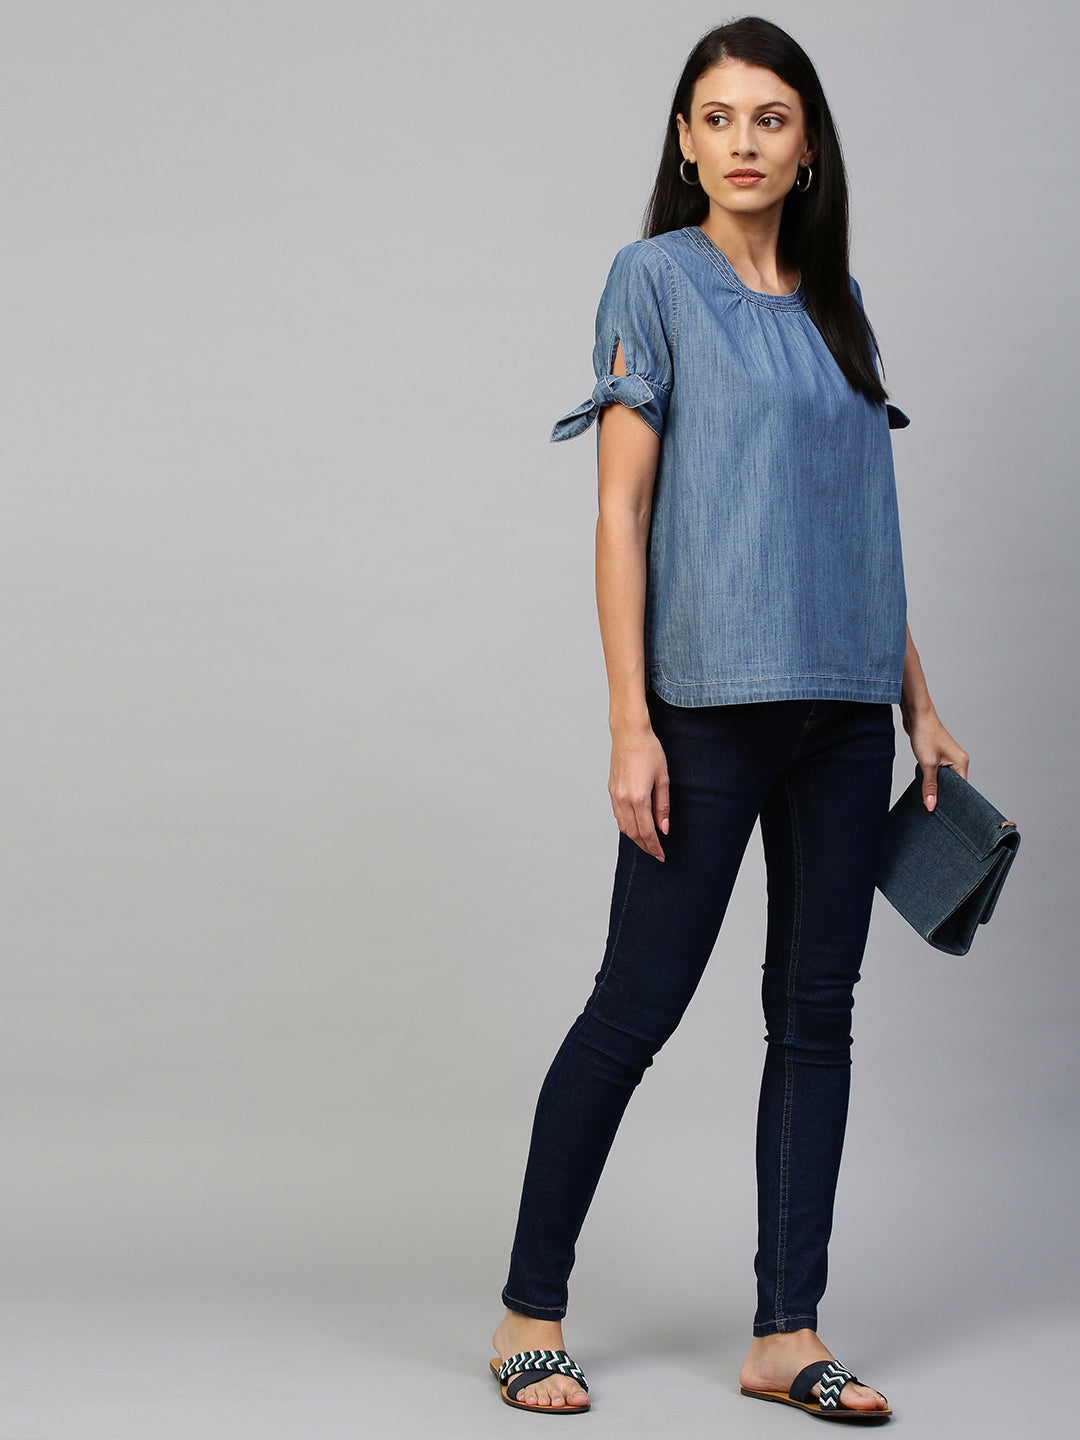 Mid Wash Blue, Light Weight Denim Box Top With Tie Up Sleeve Detailing